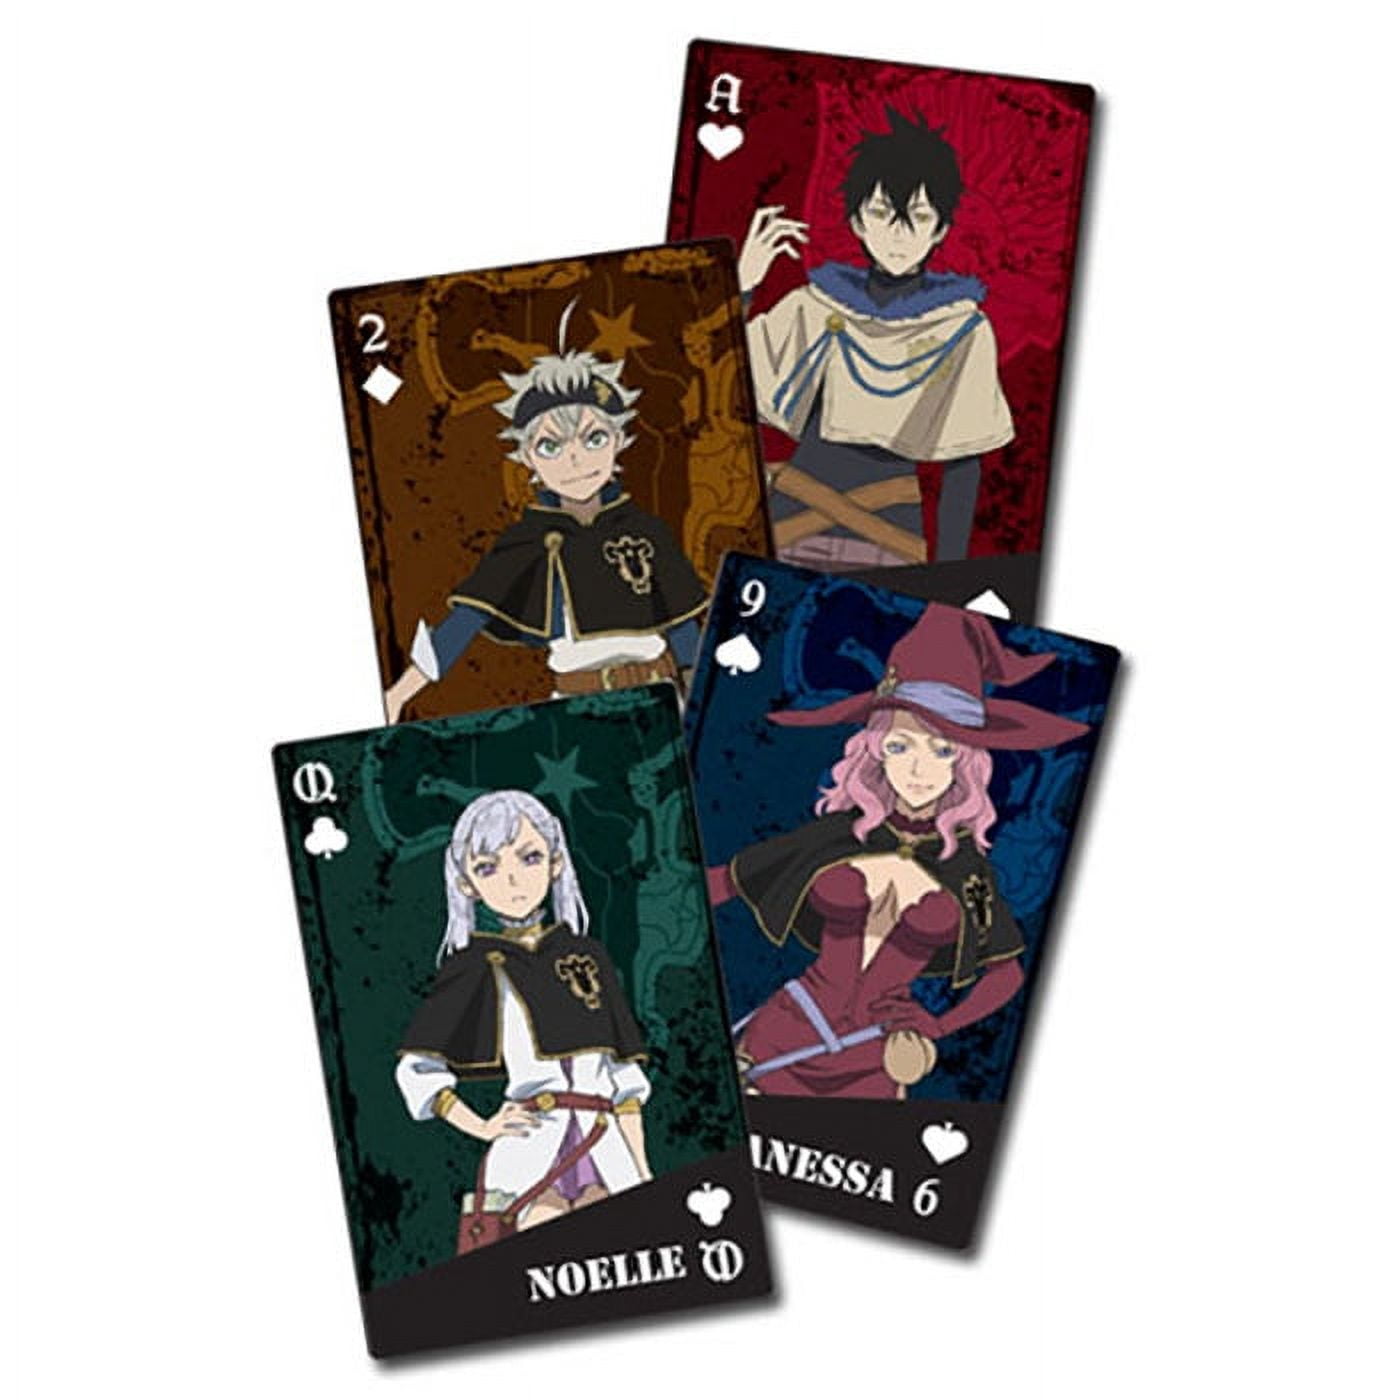 Black Clover Anime Greeting Cards for Sale